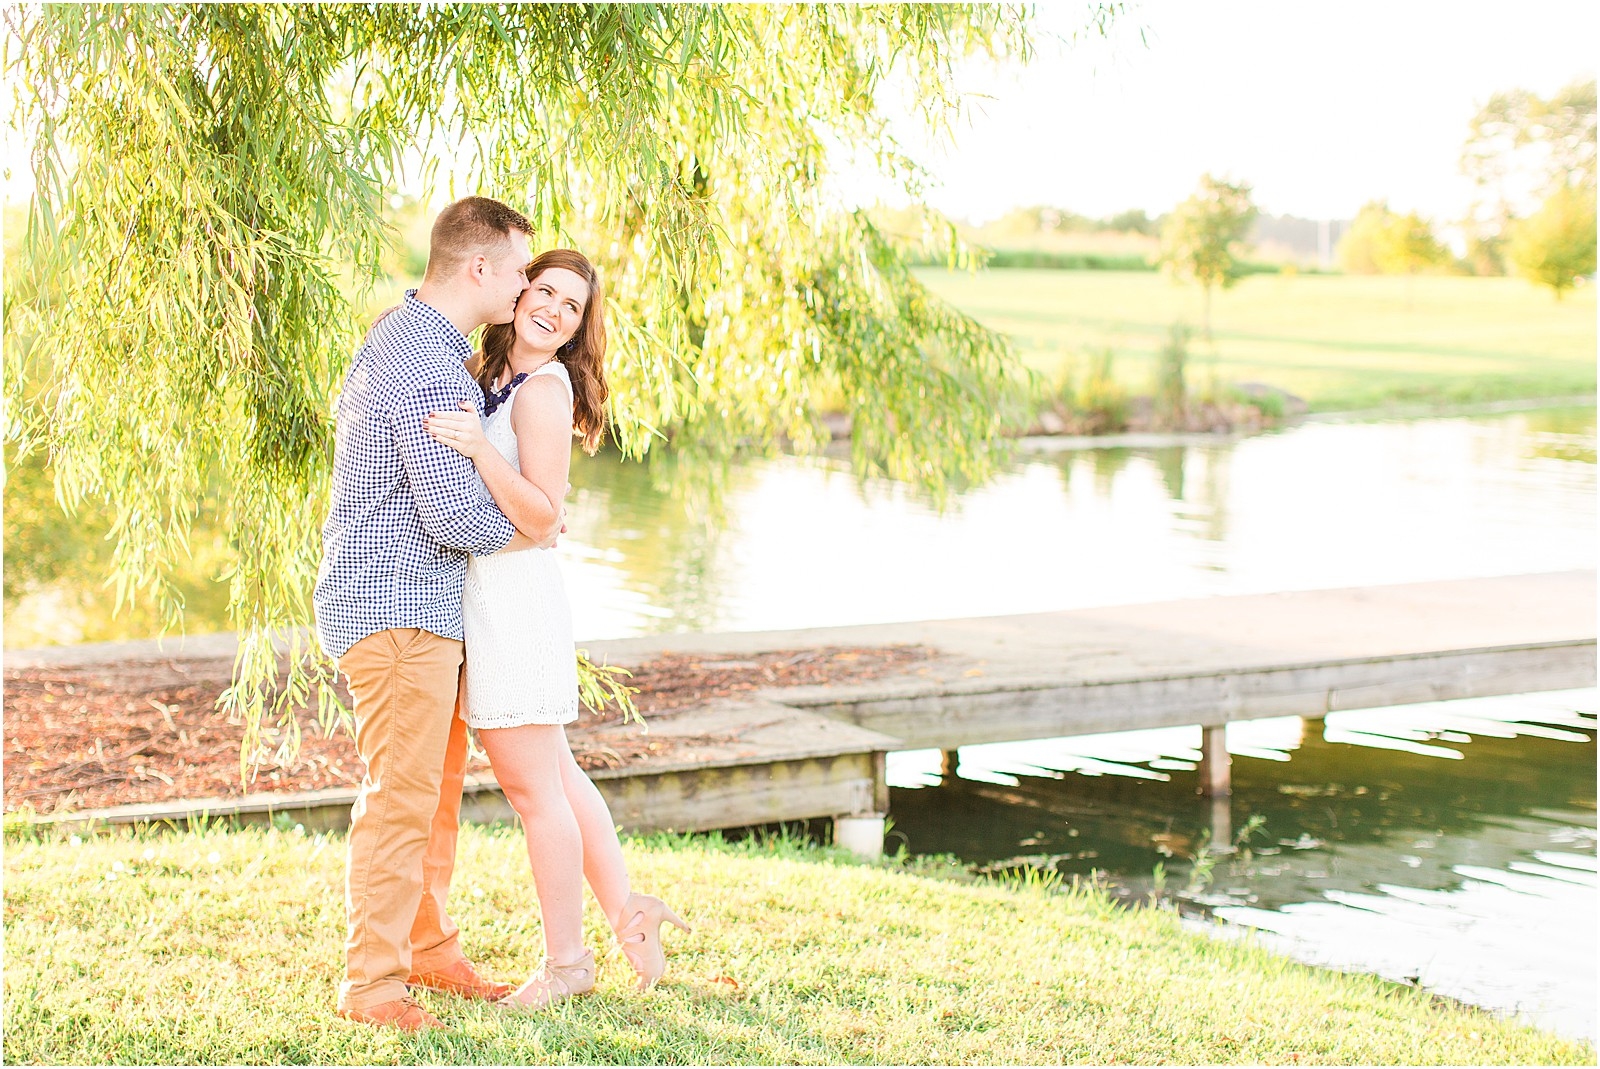 Downtown Huntingburgh Engagement Session | Gabby and Aidan | Bret and Brtandie Photography 020.jpg